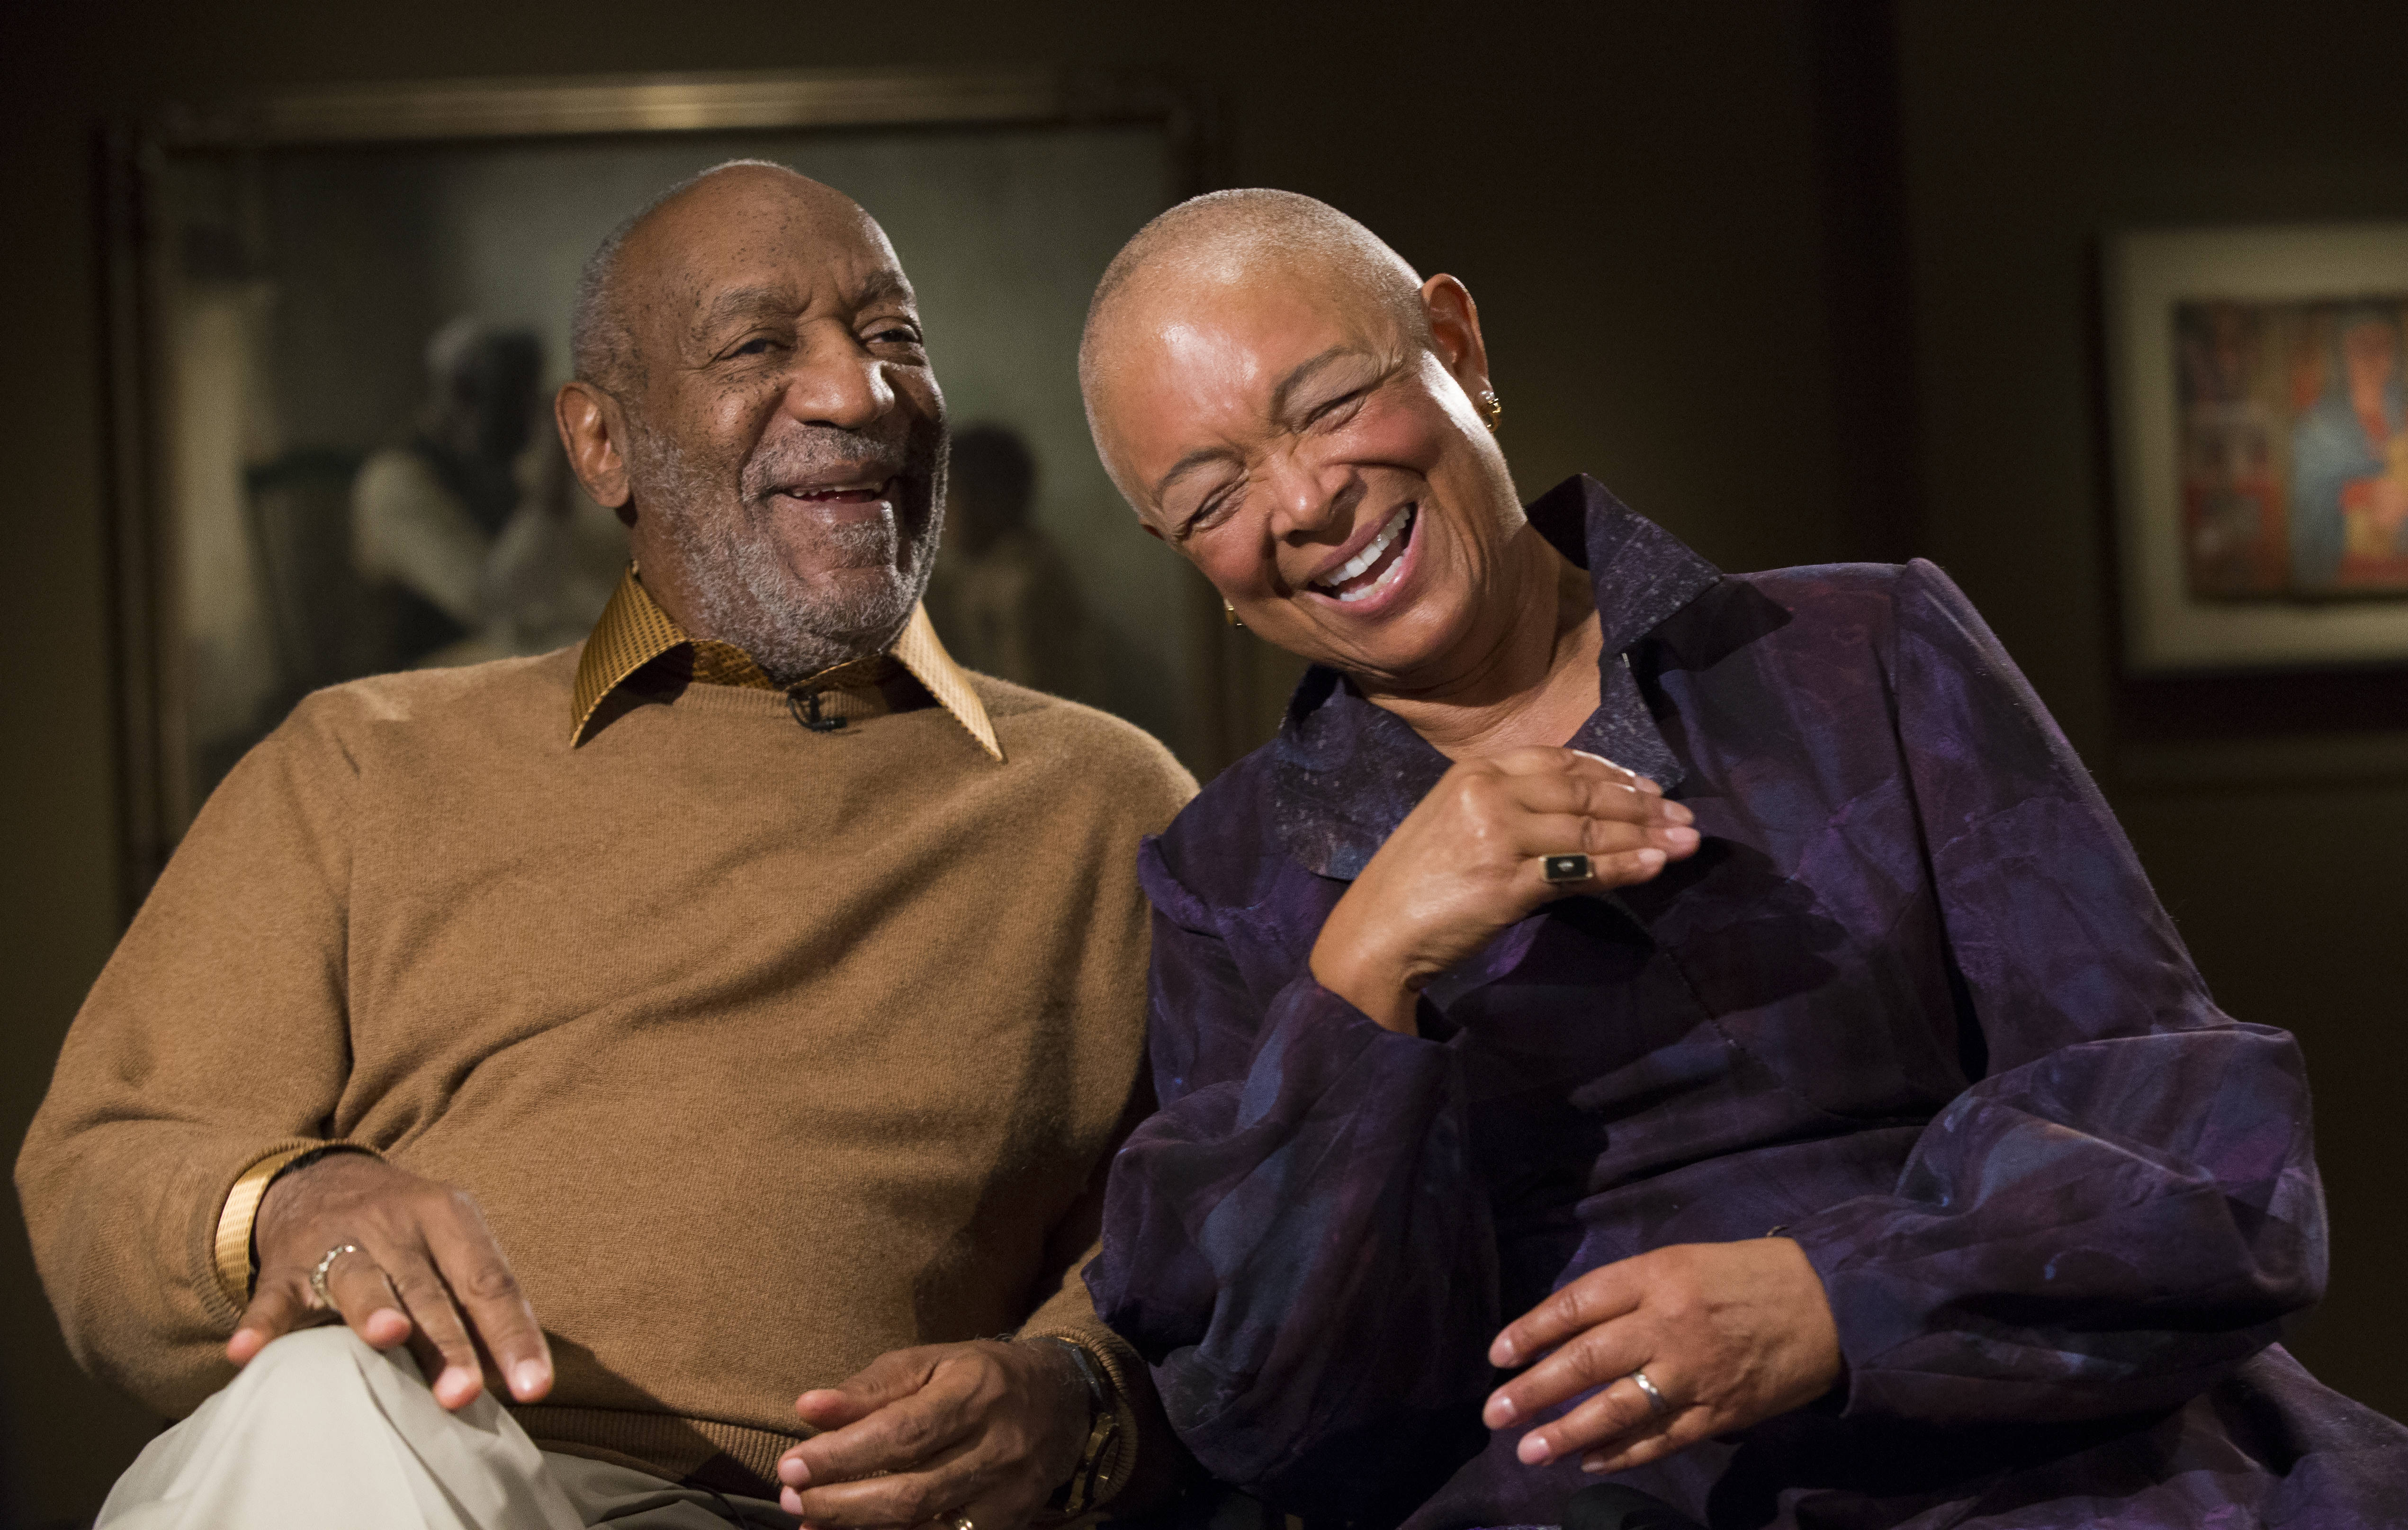 Bill Cosby and his wife Camille share a laugh as they tell a story about collecting on of the pieces in the upcoming exhibit, Conversations: African and African-American Artworks in Dialogue, at the Smithsonian's National Museum of African Art . (AP Photo/Evan Vucci)